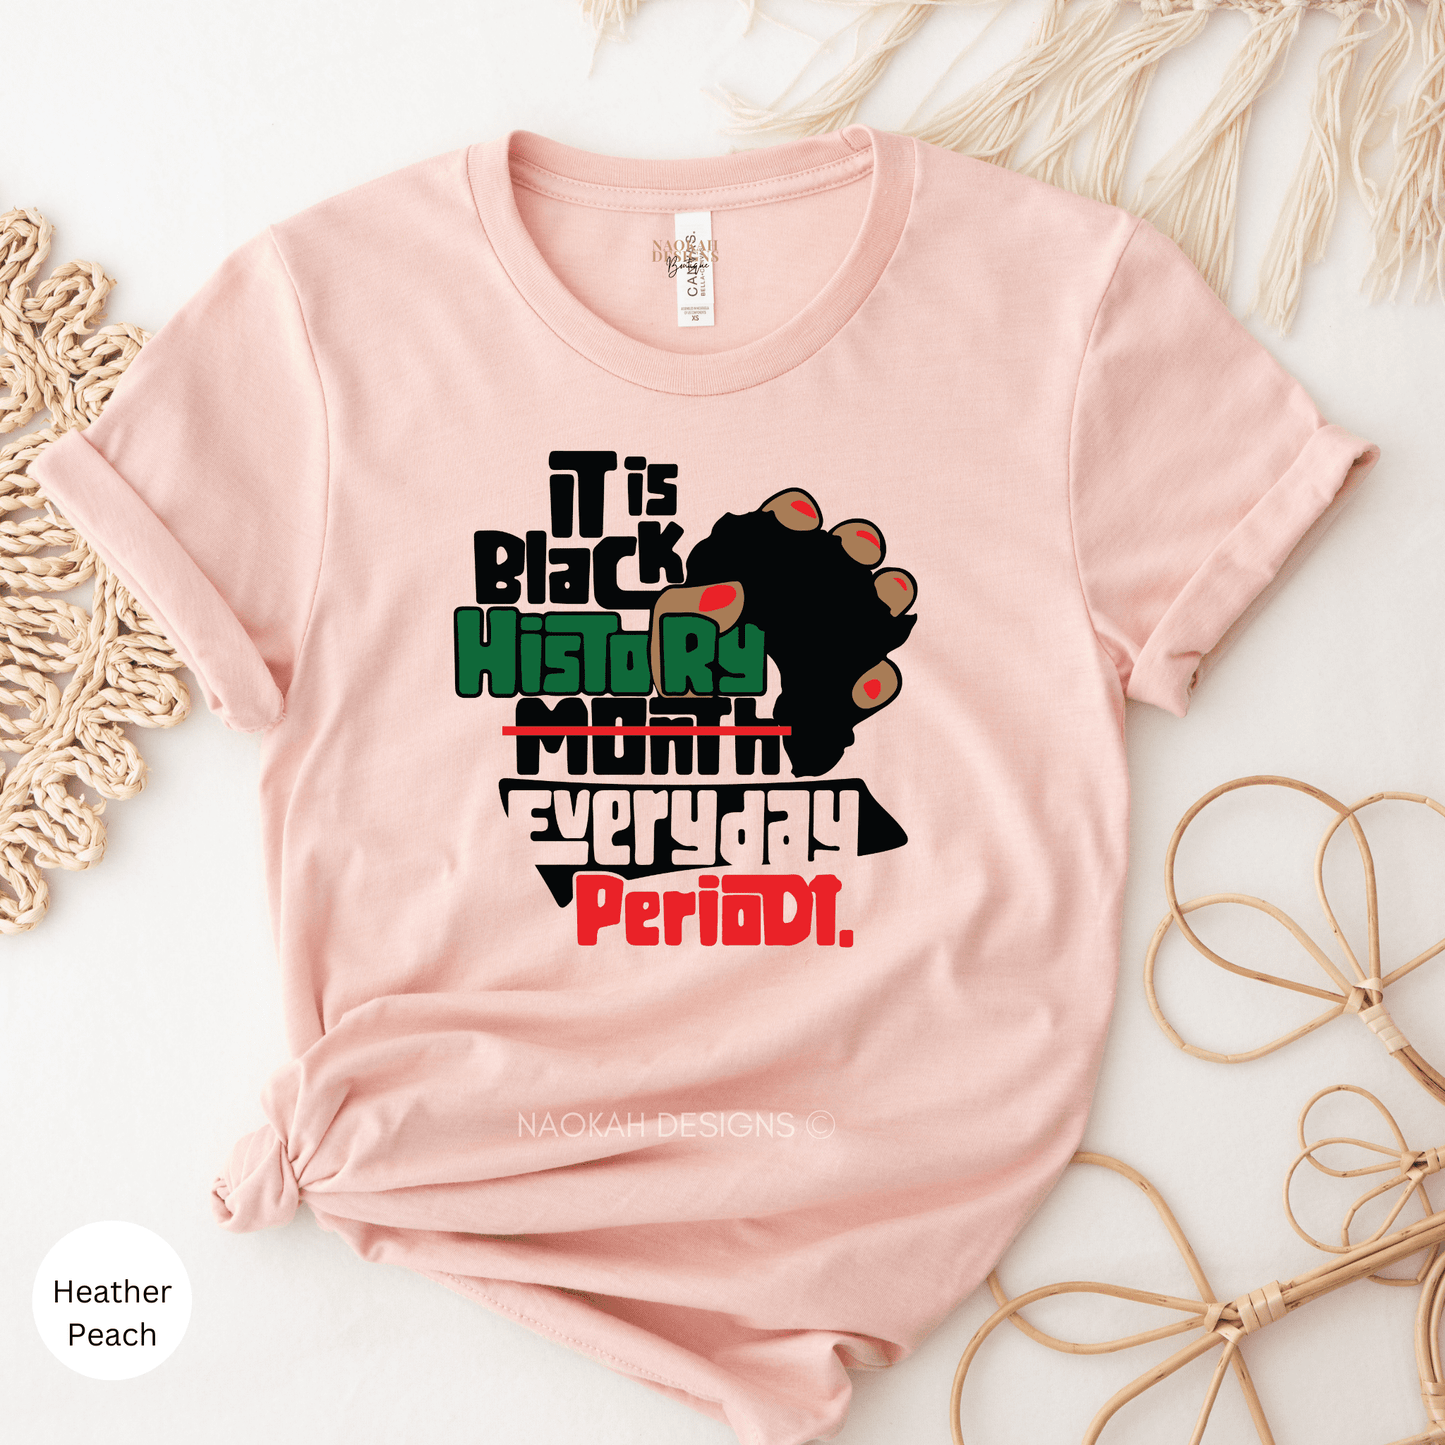 It Is Black History Everyday Period Shirt, Black Lives Matter Shirts, Black History Months, Black History is Strong Shirt, BLM Shirt